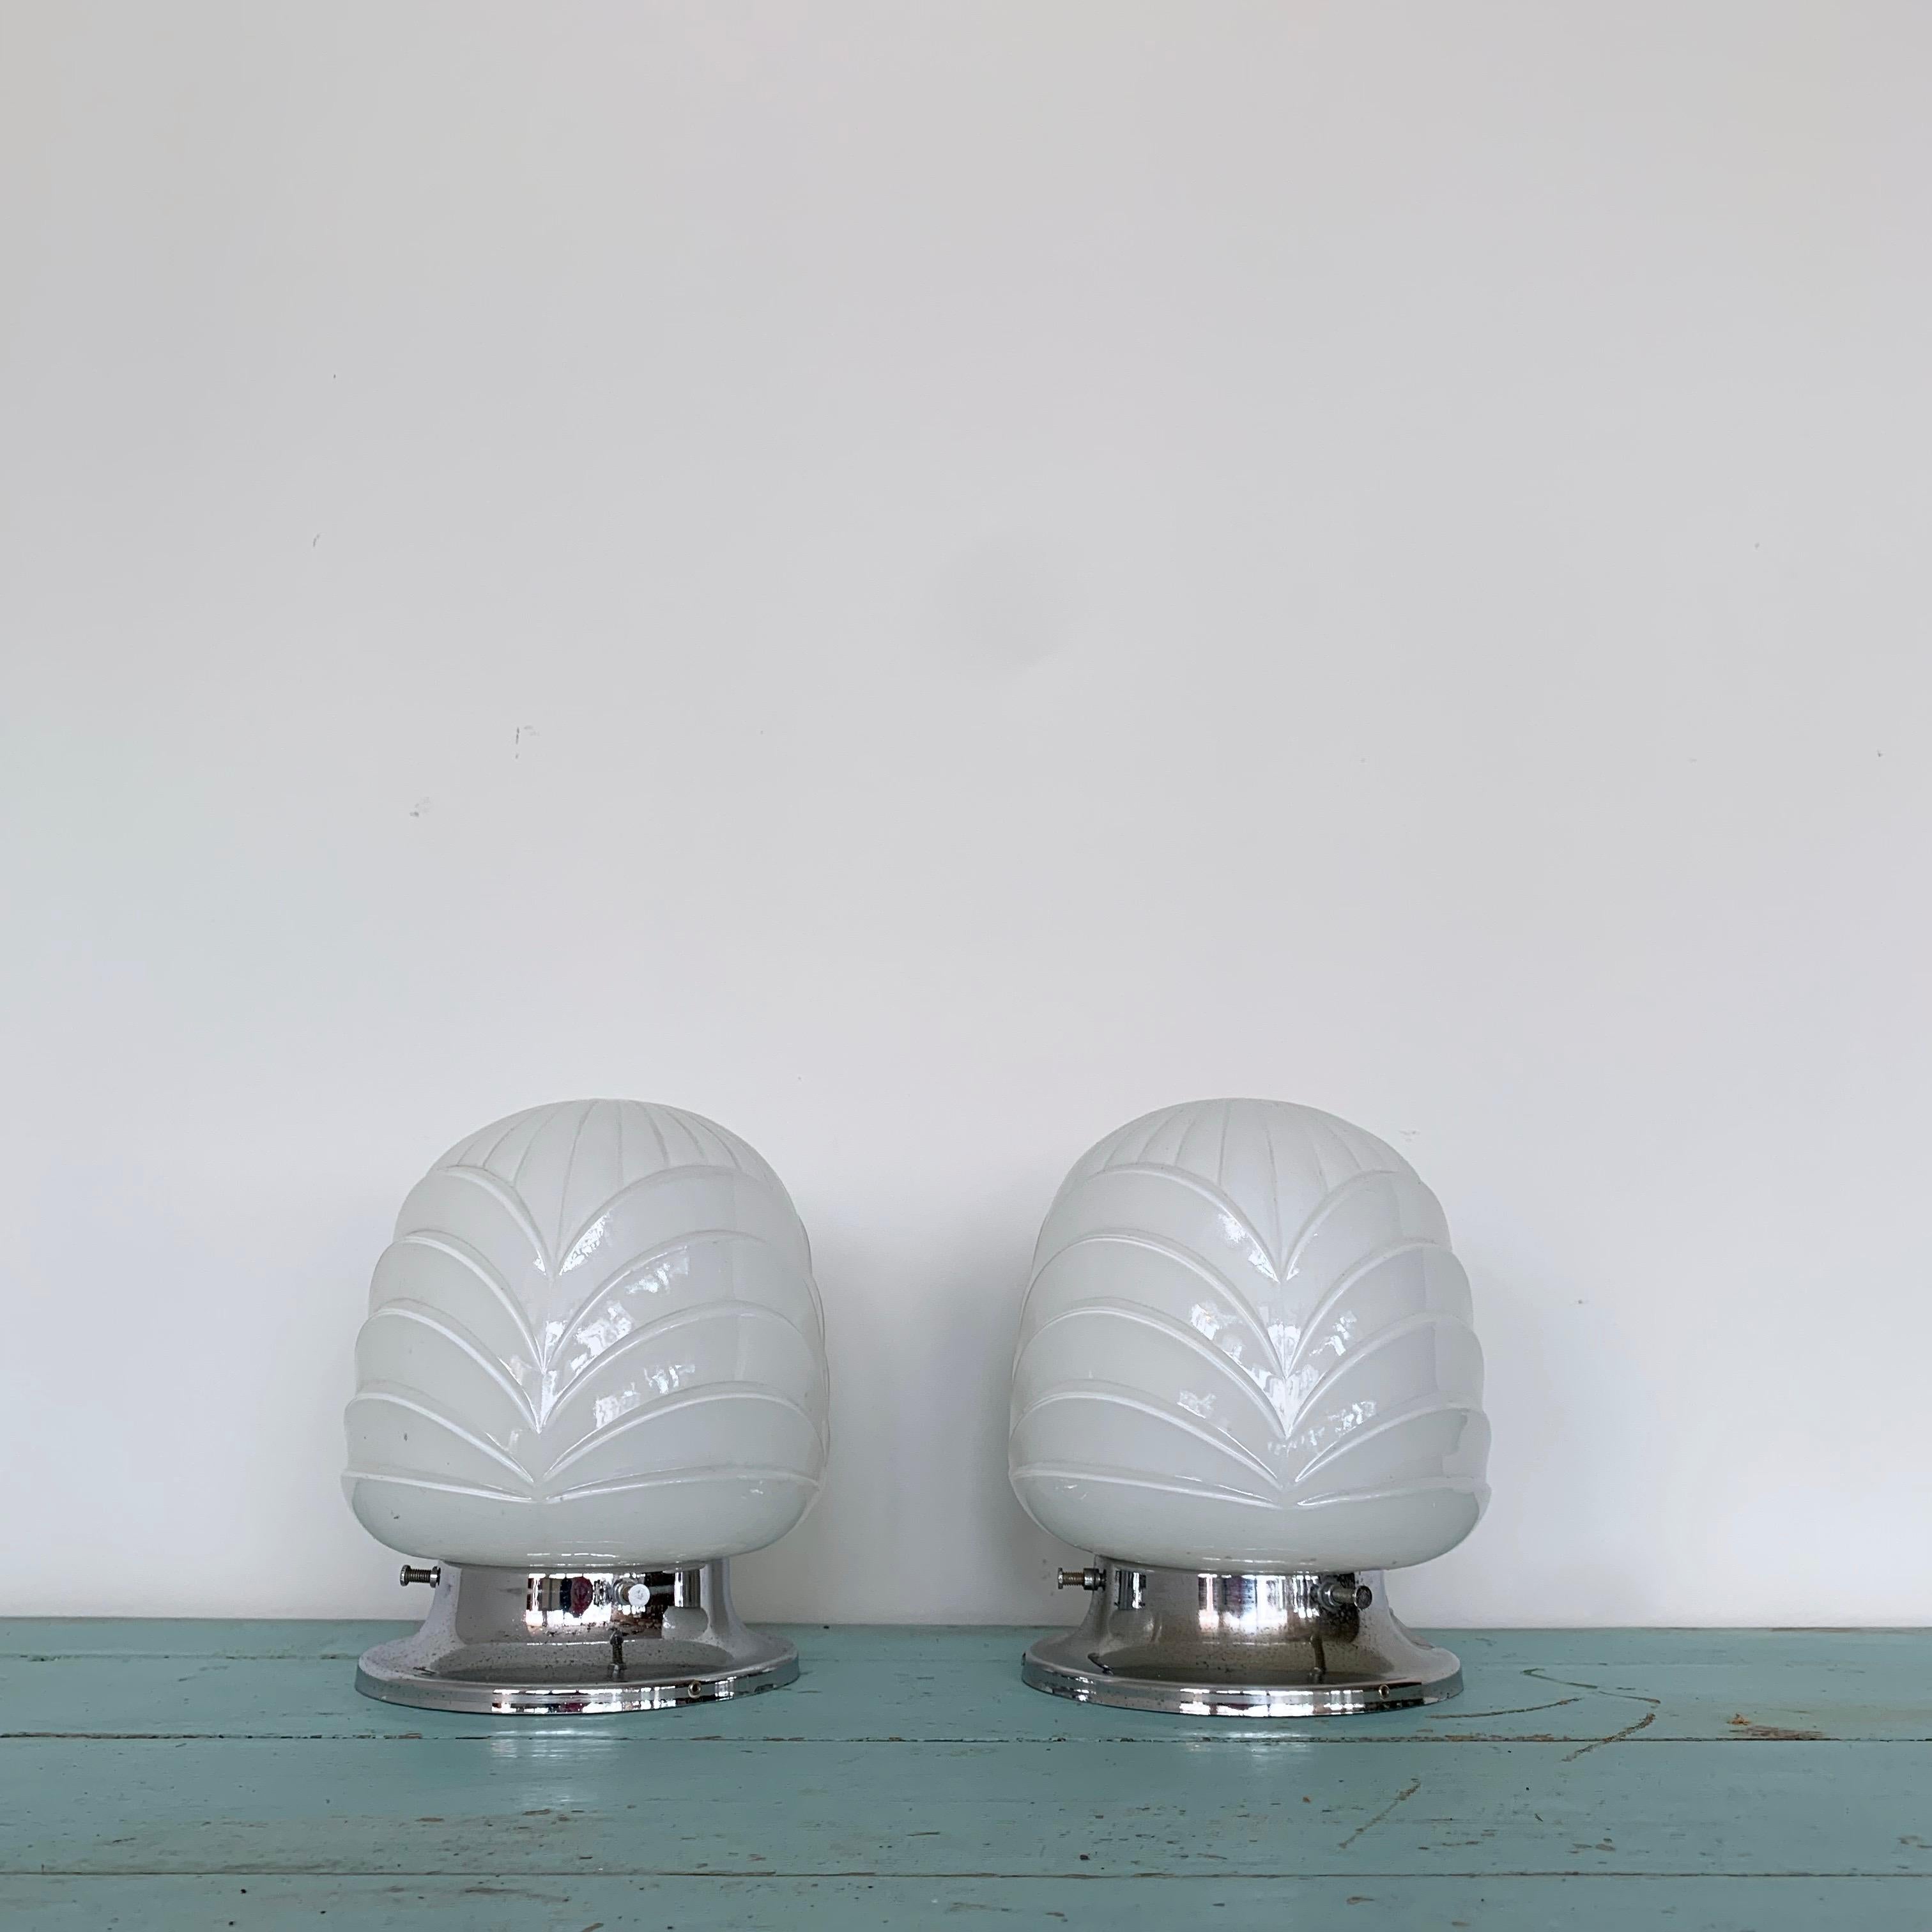 A pair of Art Deco fittings. Pitted aged chromed fittings with scalloped shaped opaline glass shades. Sold as a pair. Can be used as ceiling pieces or wall lights. Each shade requires one B22 lamp.

These have been fully rewired here, in